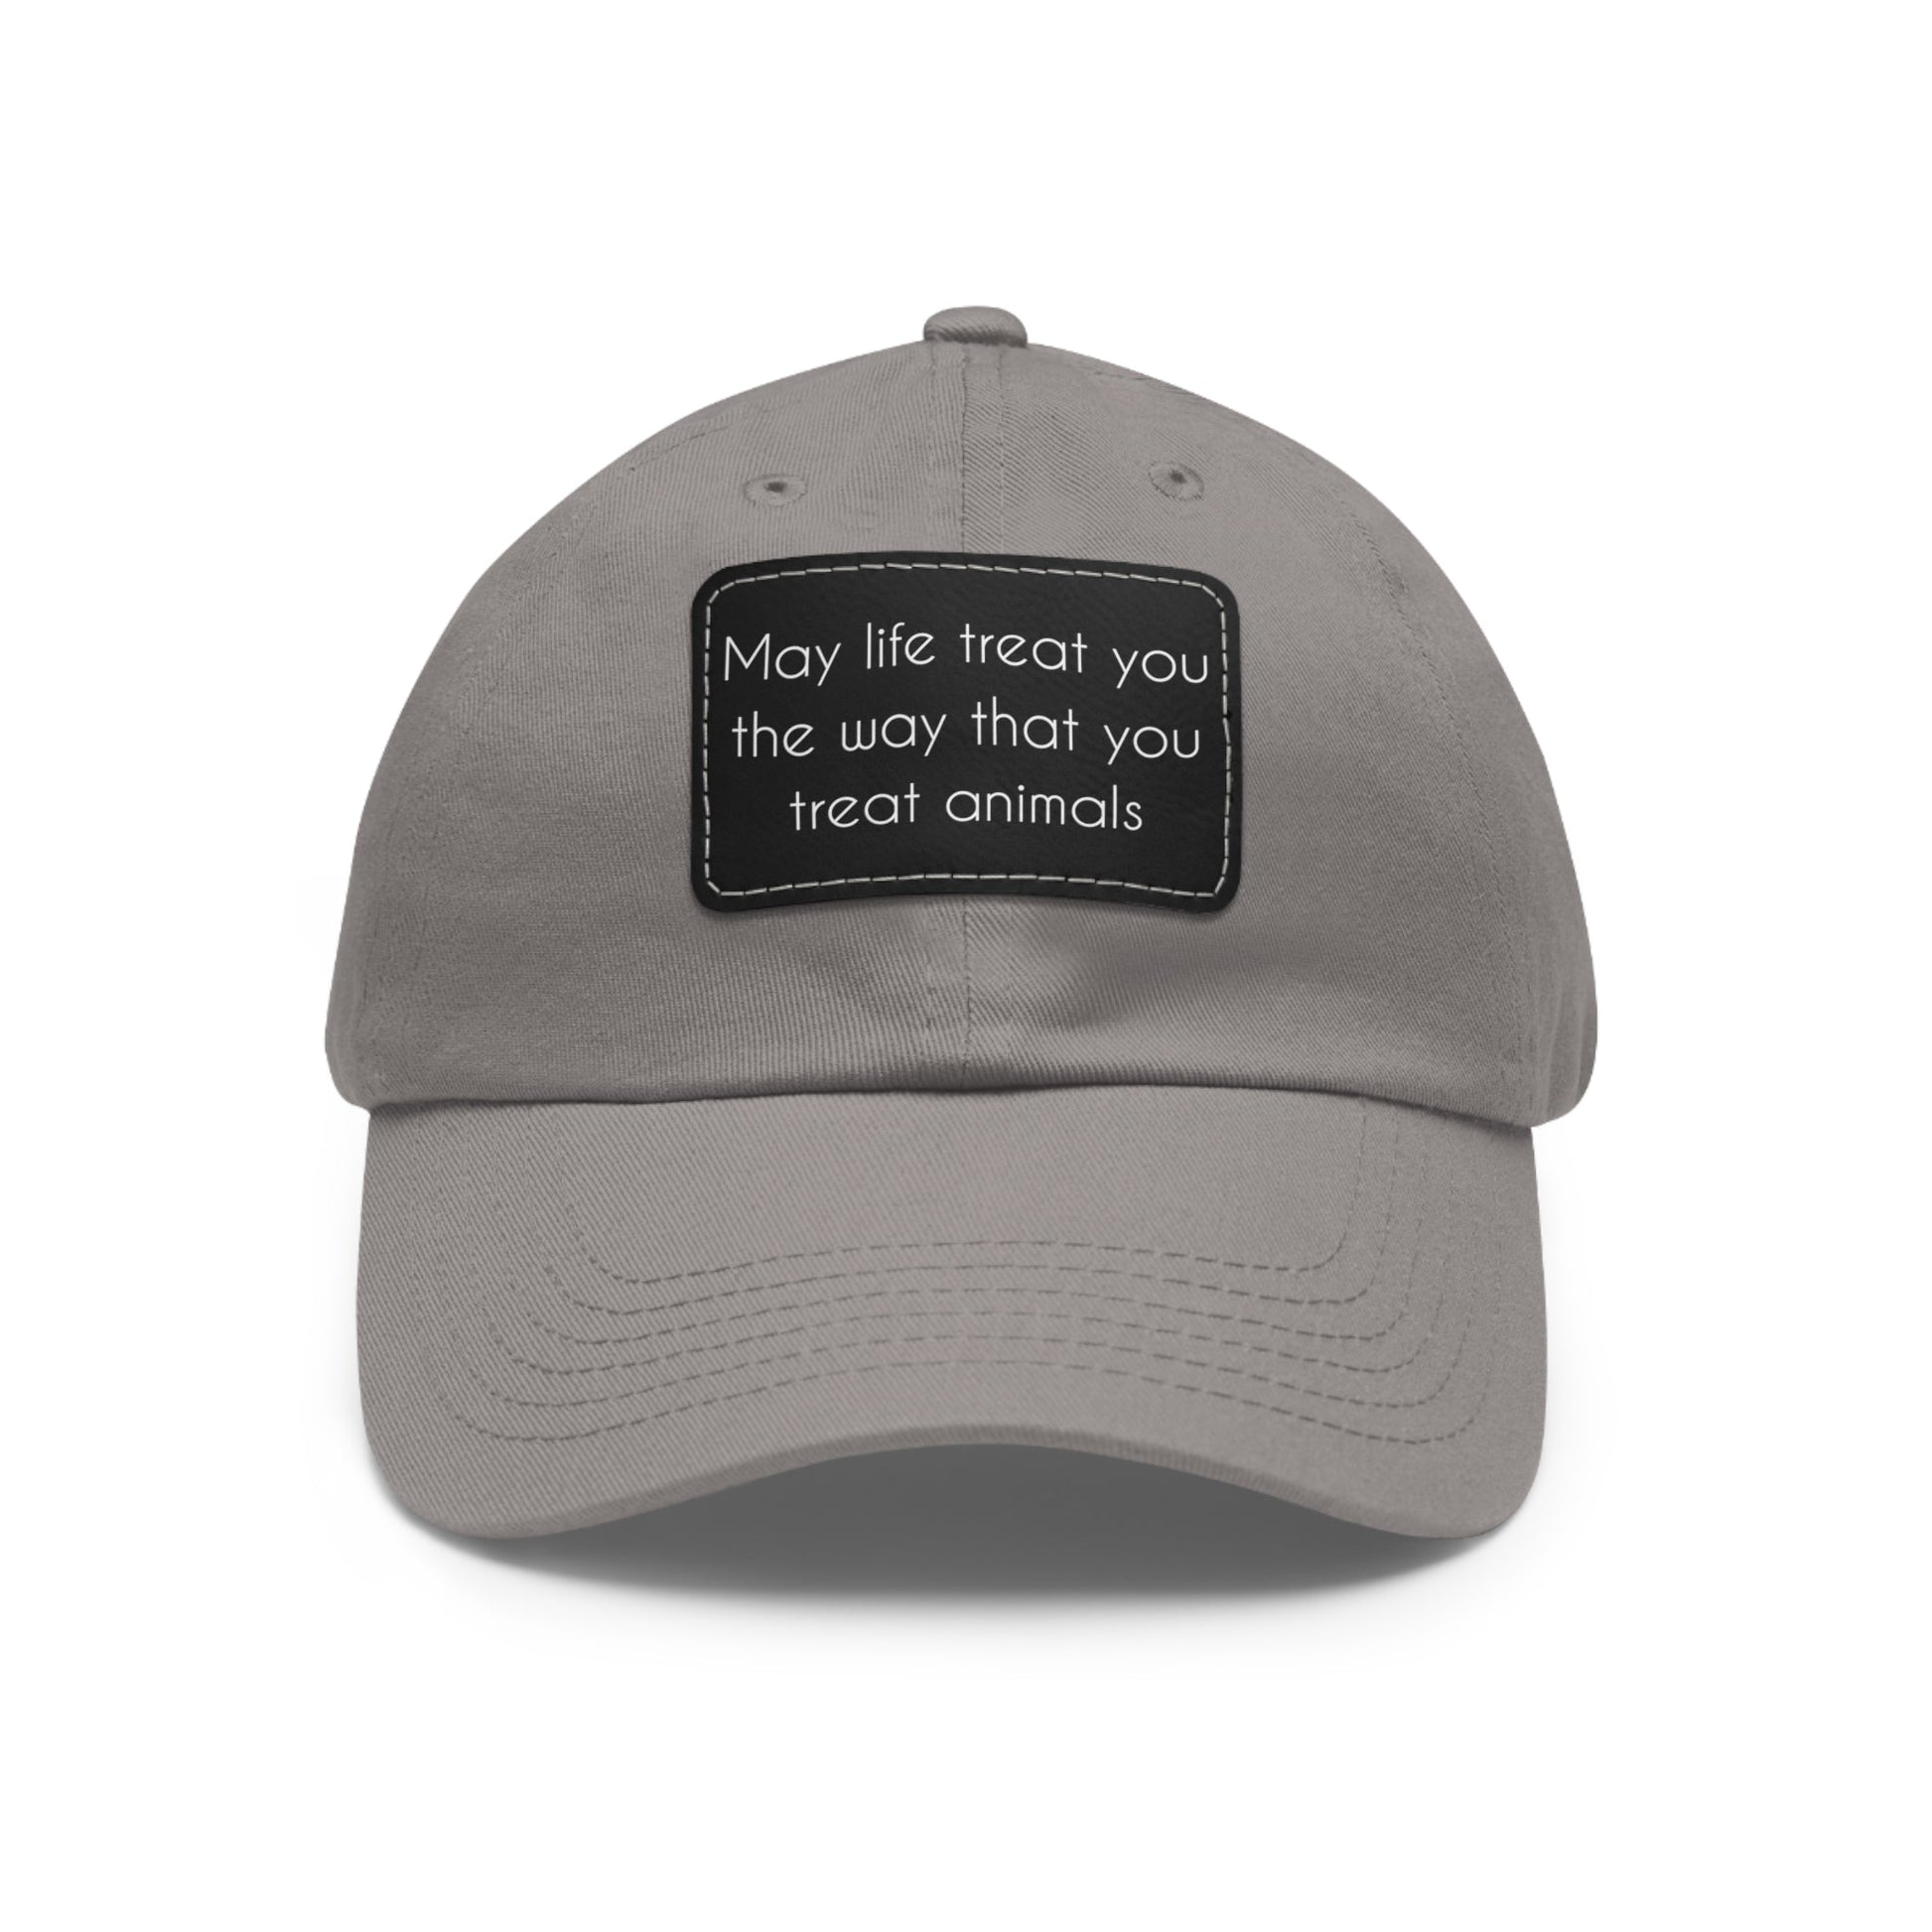 May Life Treat You The Way That You Treat Animals | Dad Hat - Detezi Designs-28828431306239329899